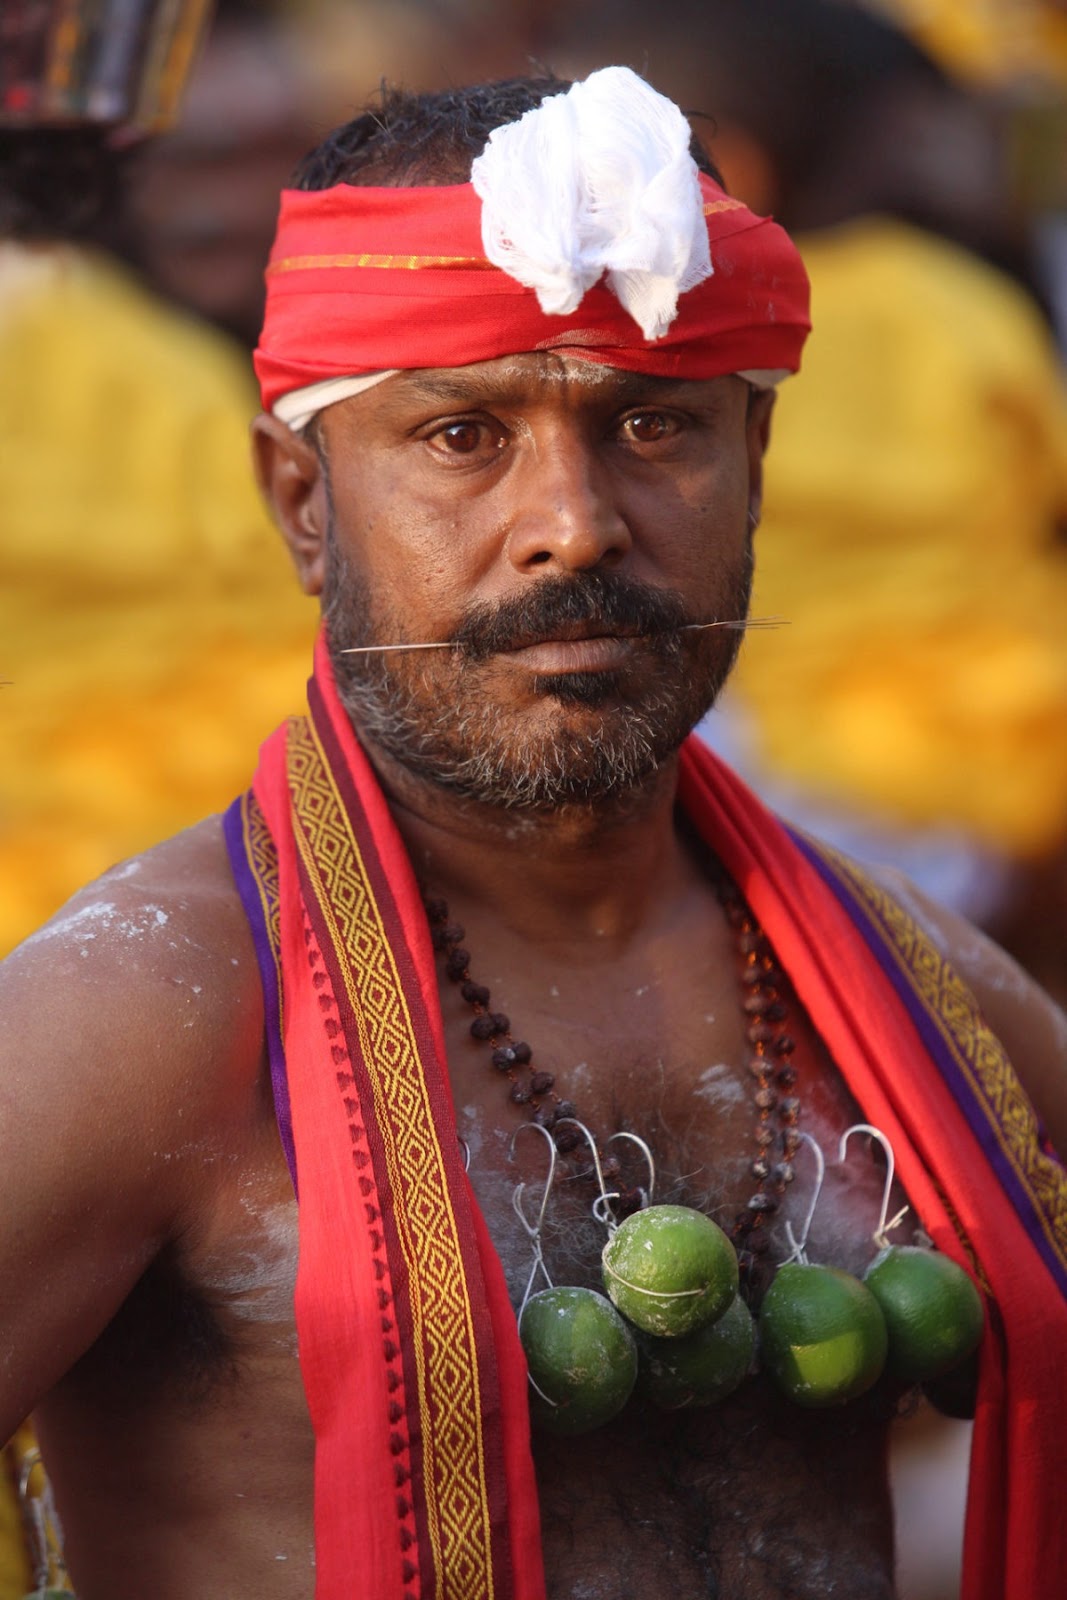 A devotee pierced with many hooks full of offerings for Lord Murugan